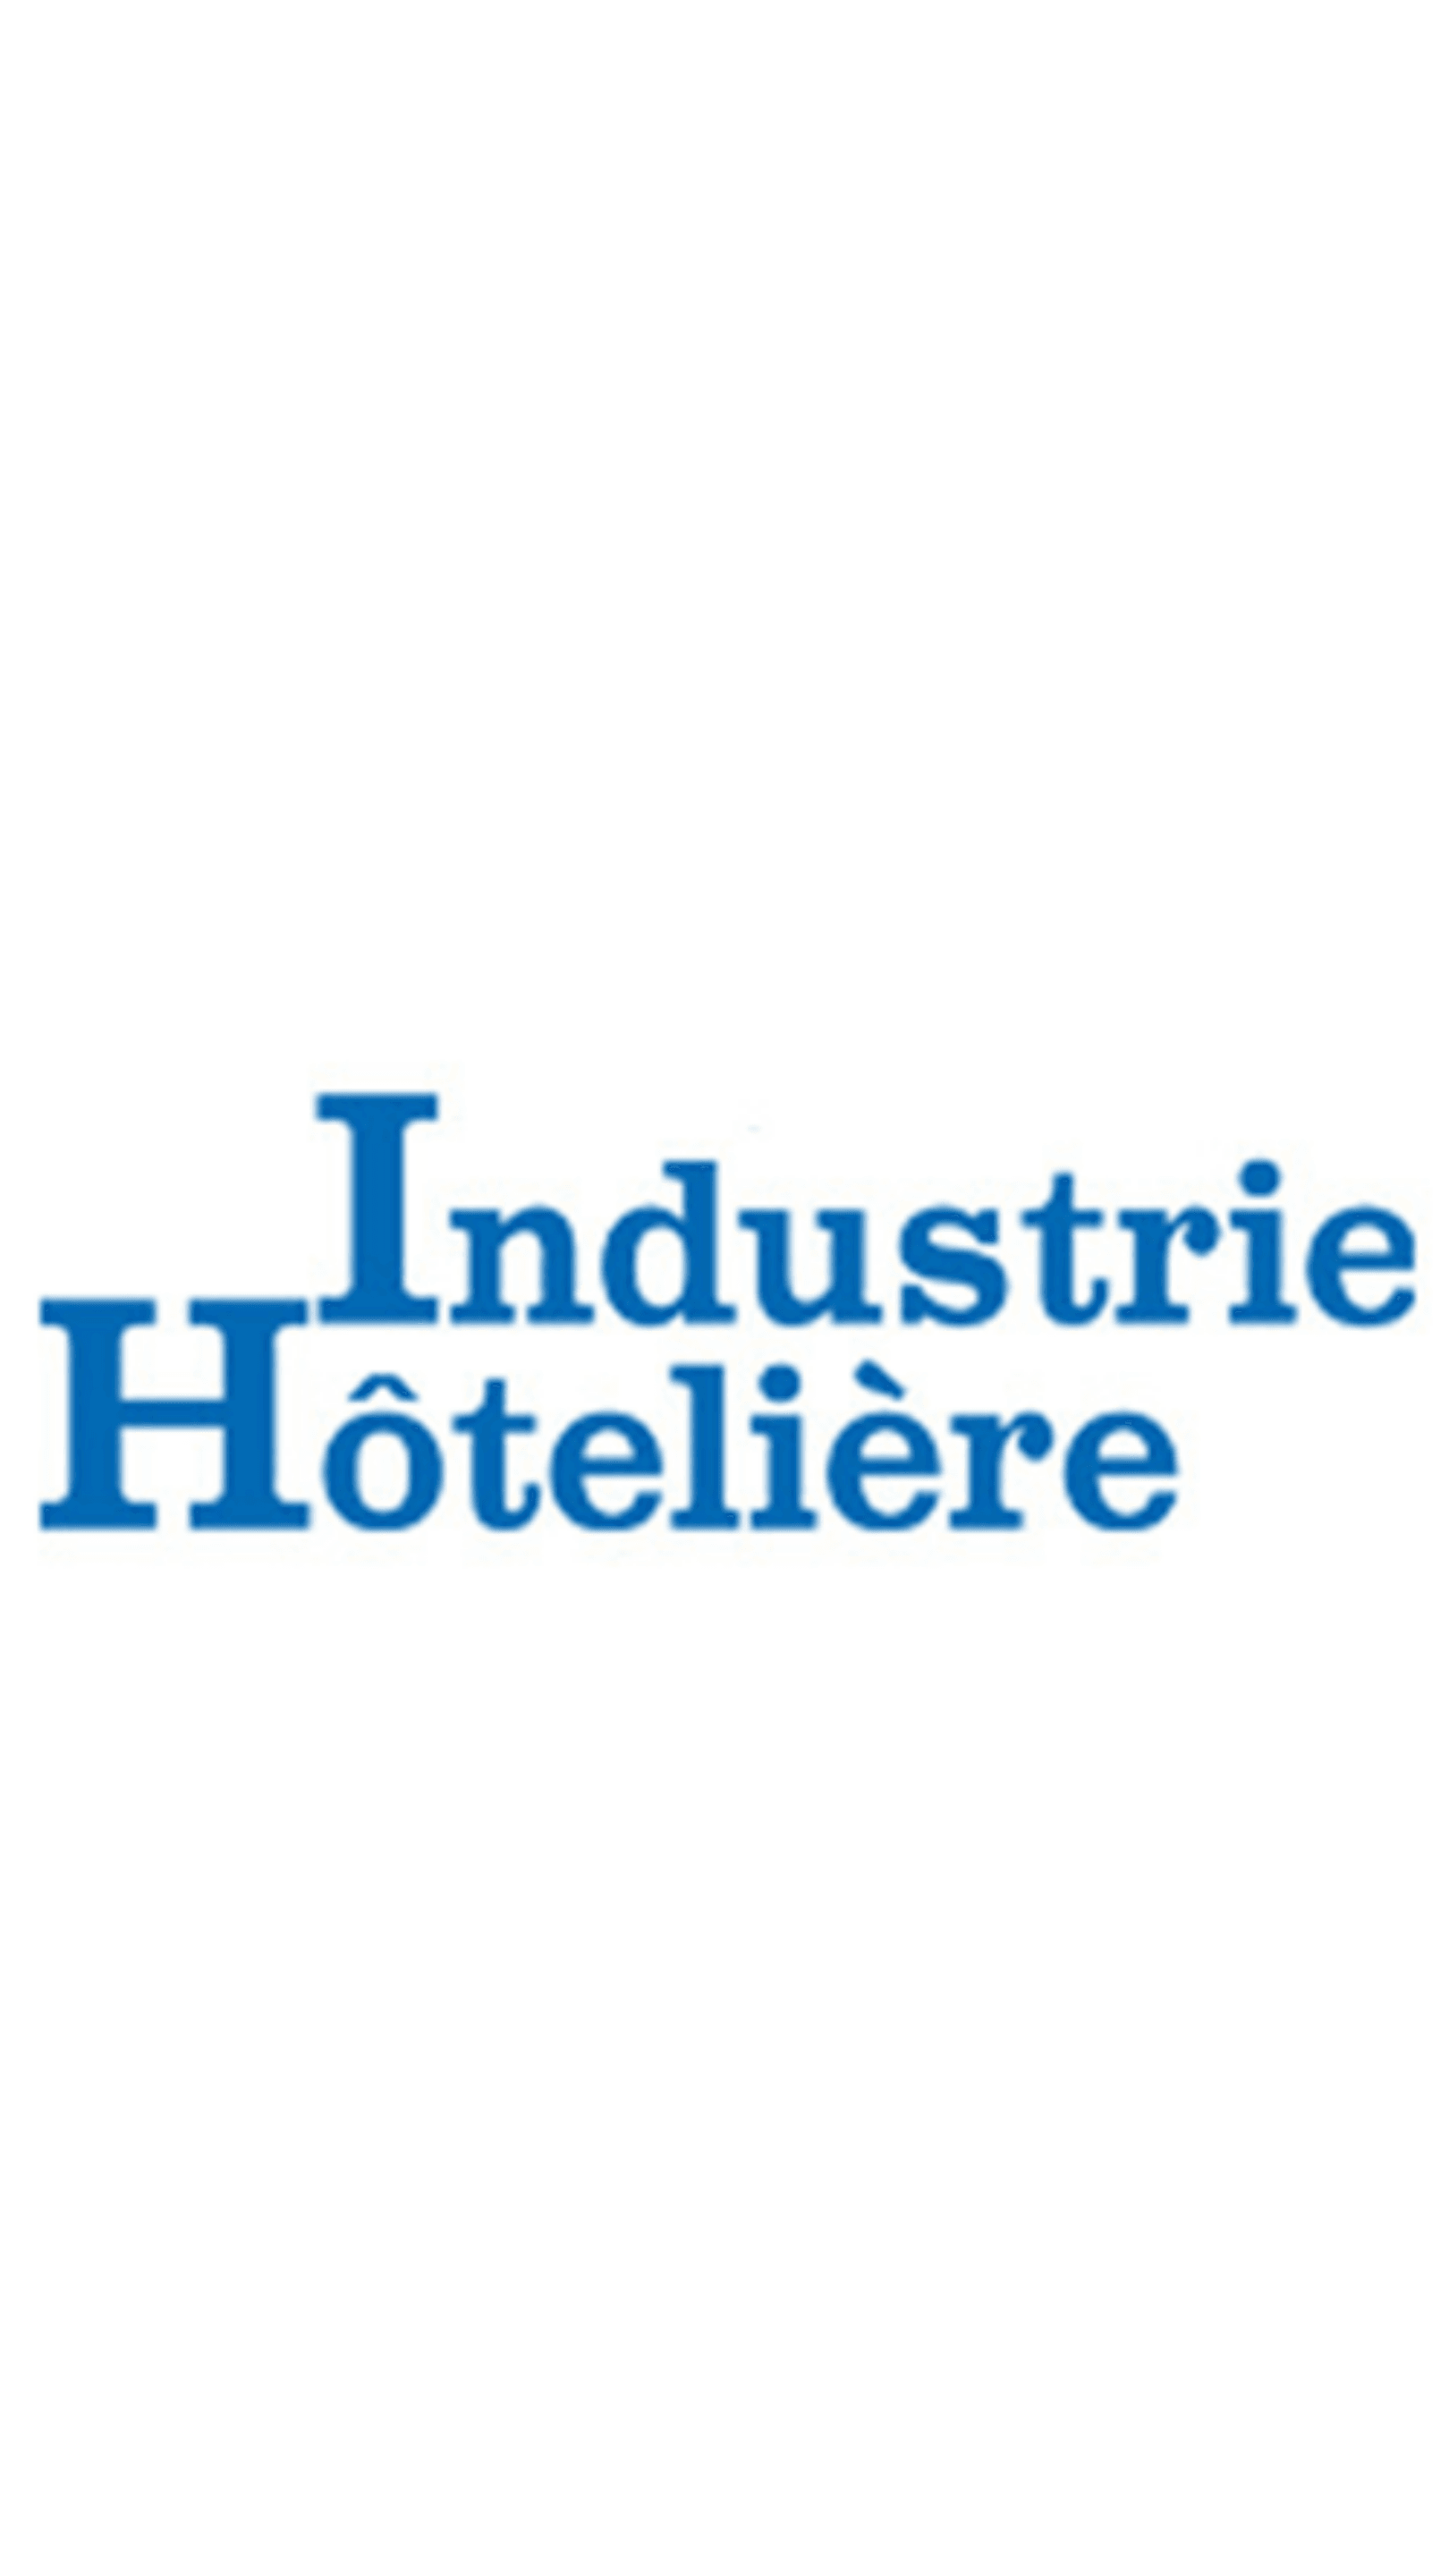 660/Presse/Industrie_Hotelliere.png